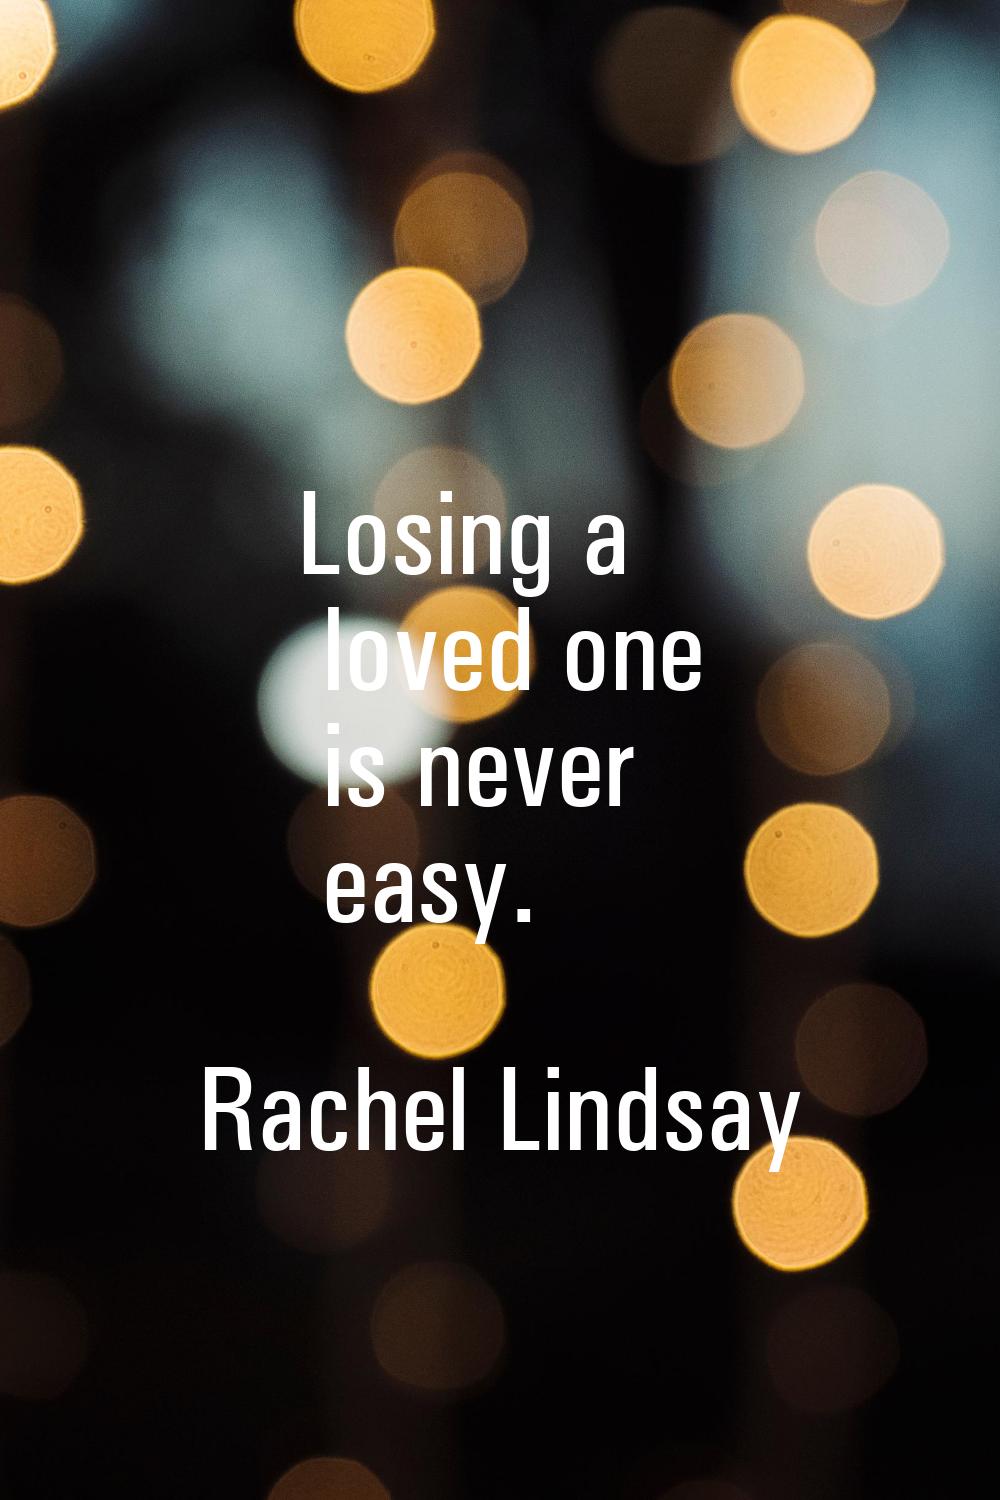 Losing a loved one is never easy.